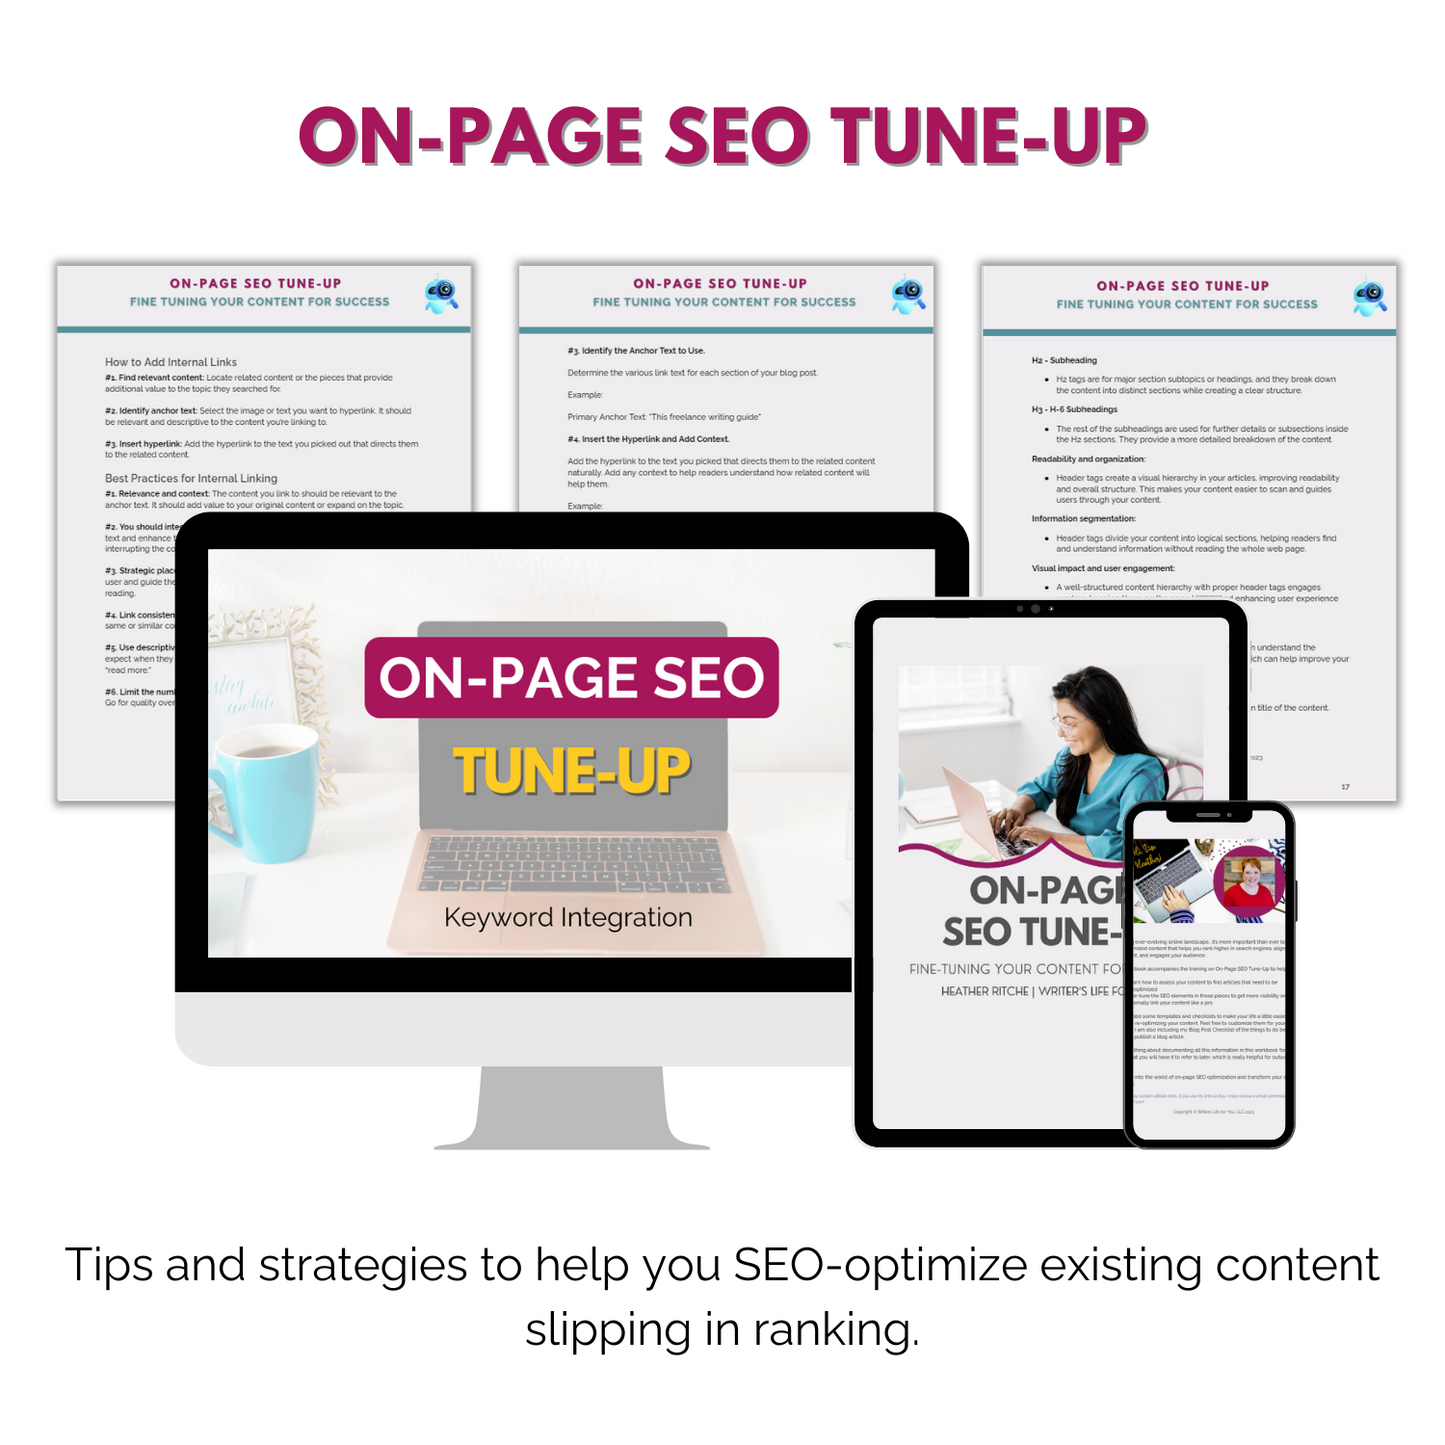 On-Page SEO Tune-Up - the workbook and training that helps you SEO-optimize your existing content 